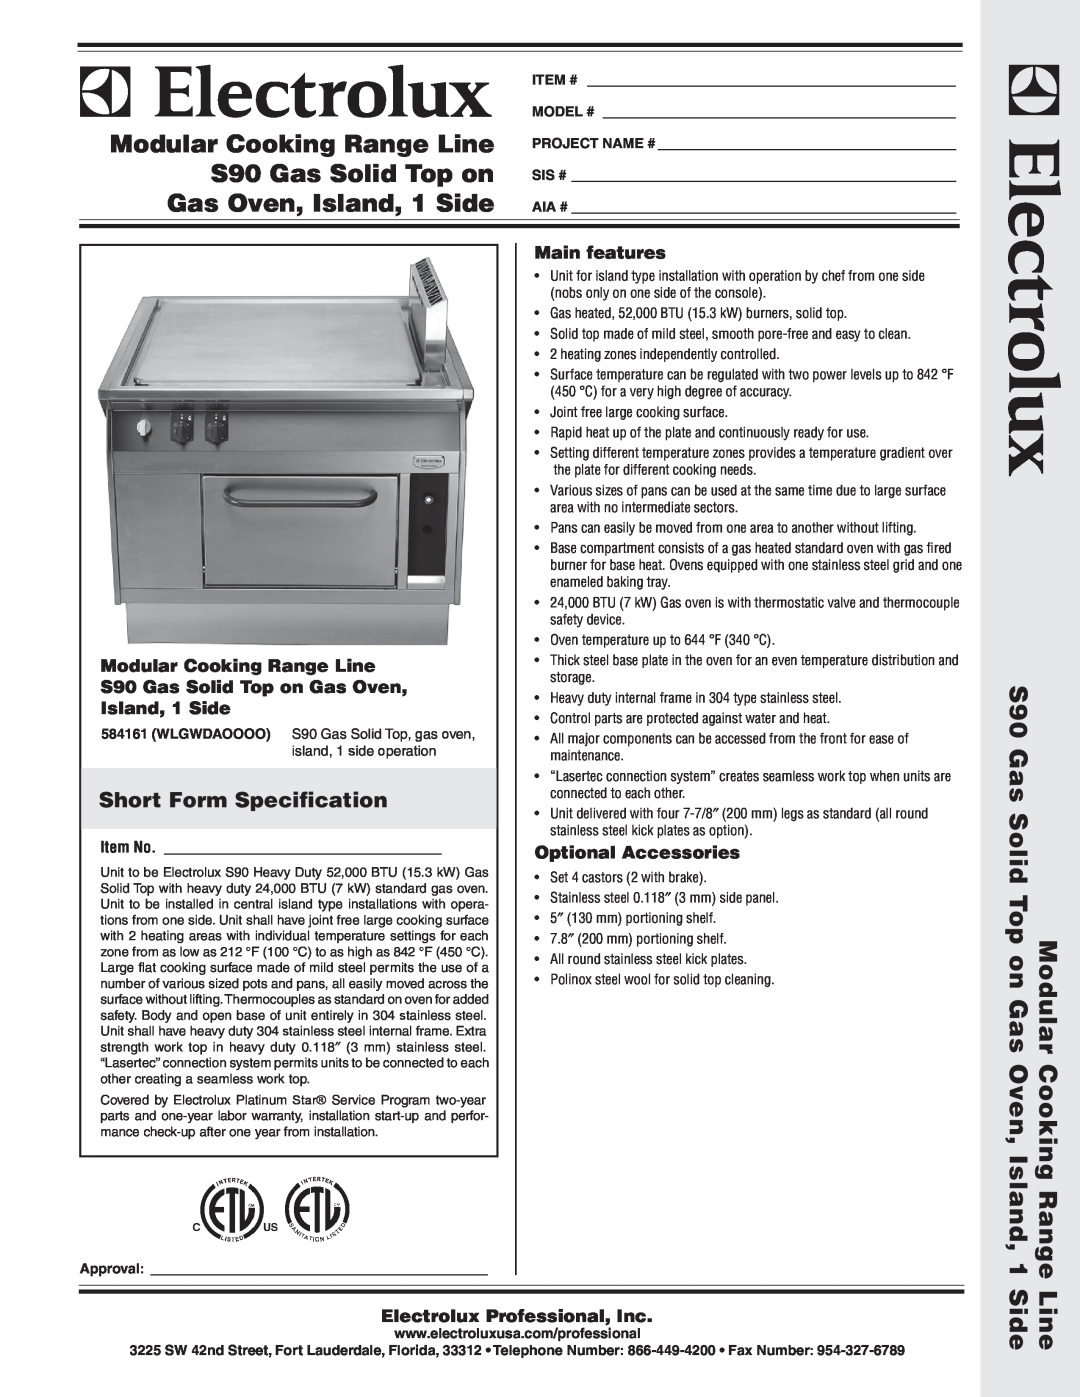 Electrolux 584161 warranty Short Form Specification, Main features, Modular Cooking Range Line, Island, 1 Side, Item # 